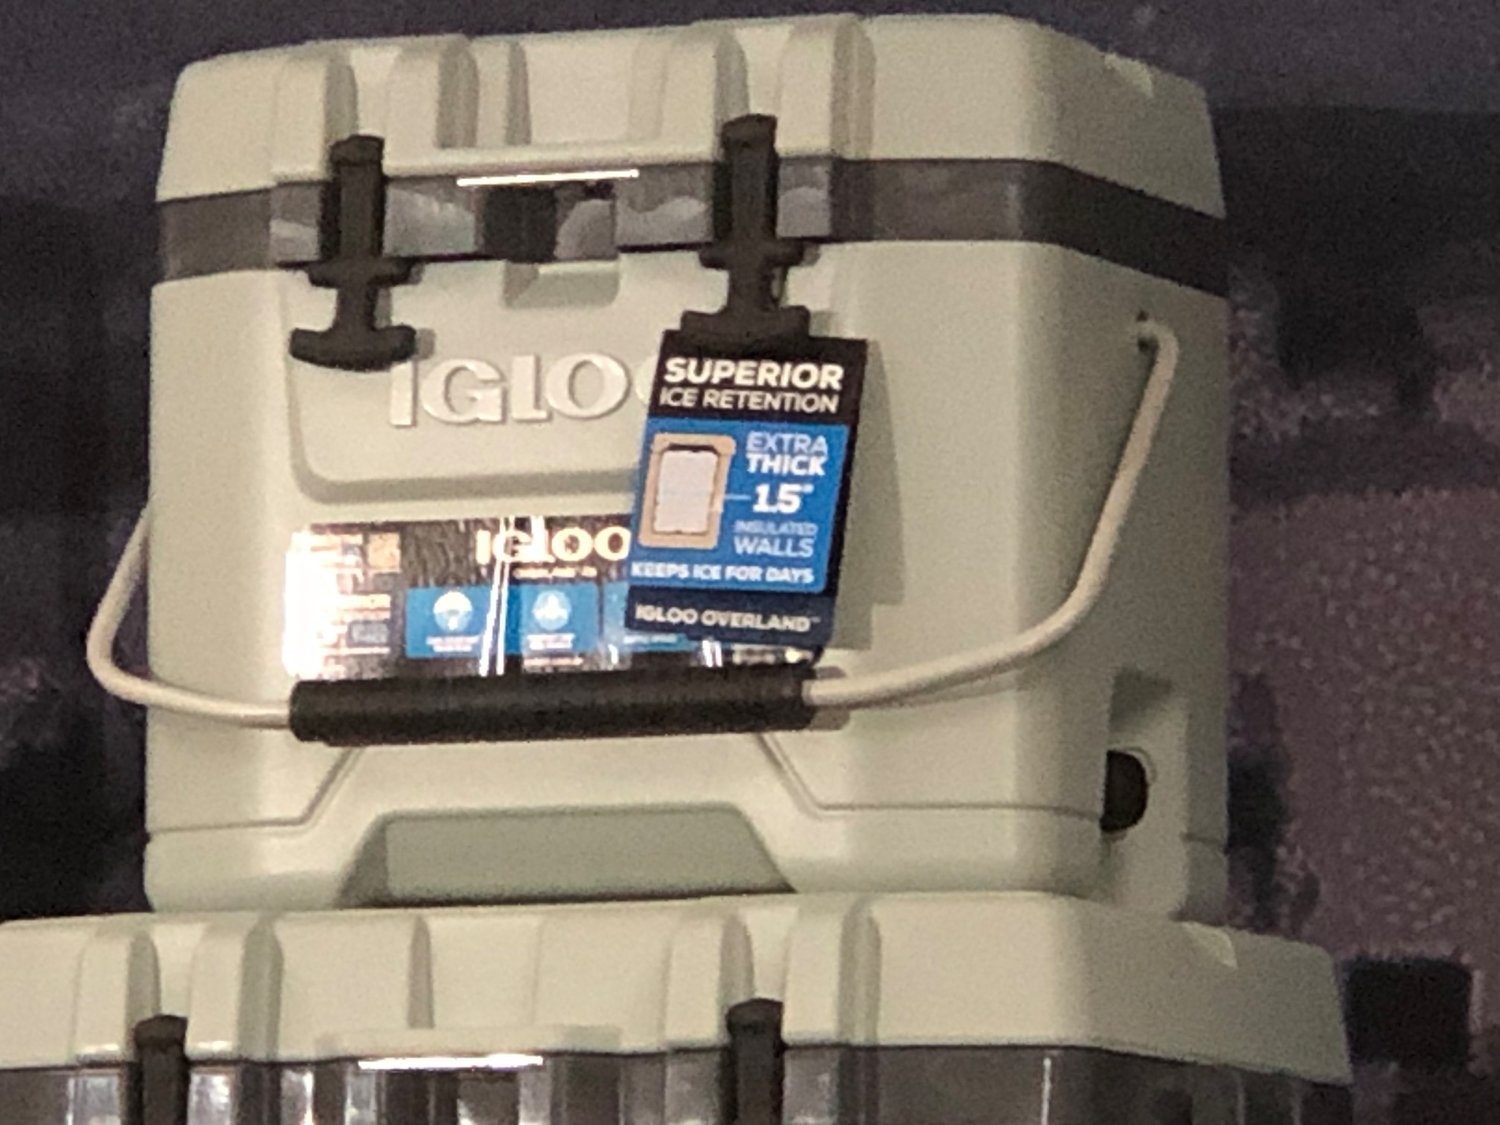 The Igloo Overland series of coolers was created exclusively for sale at Walmart.